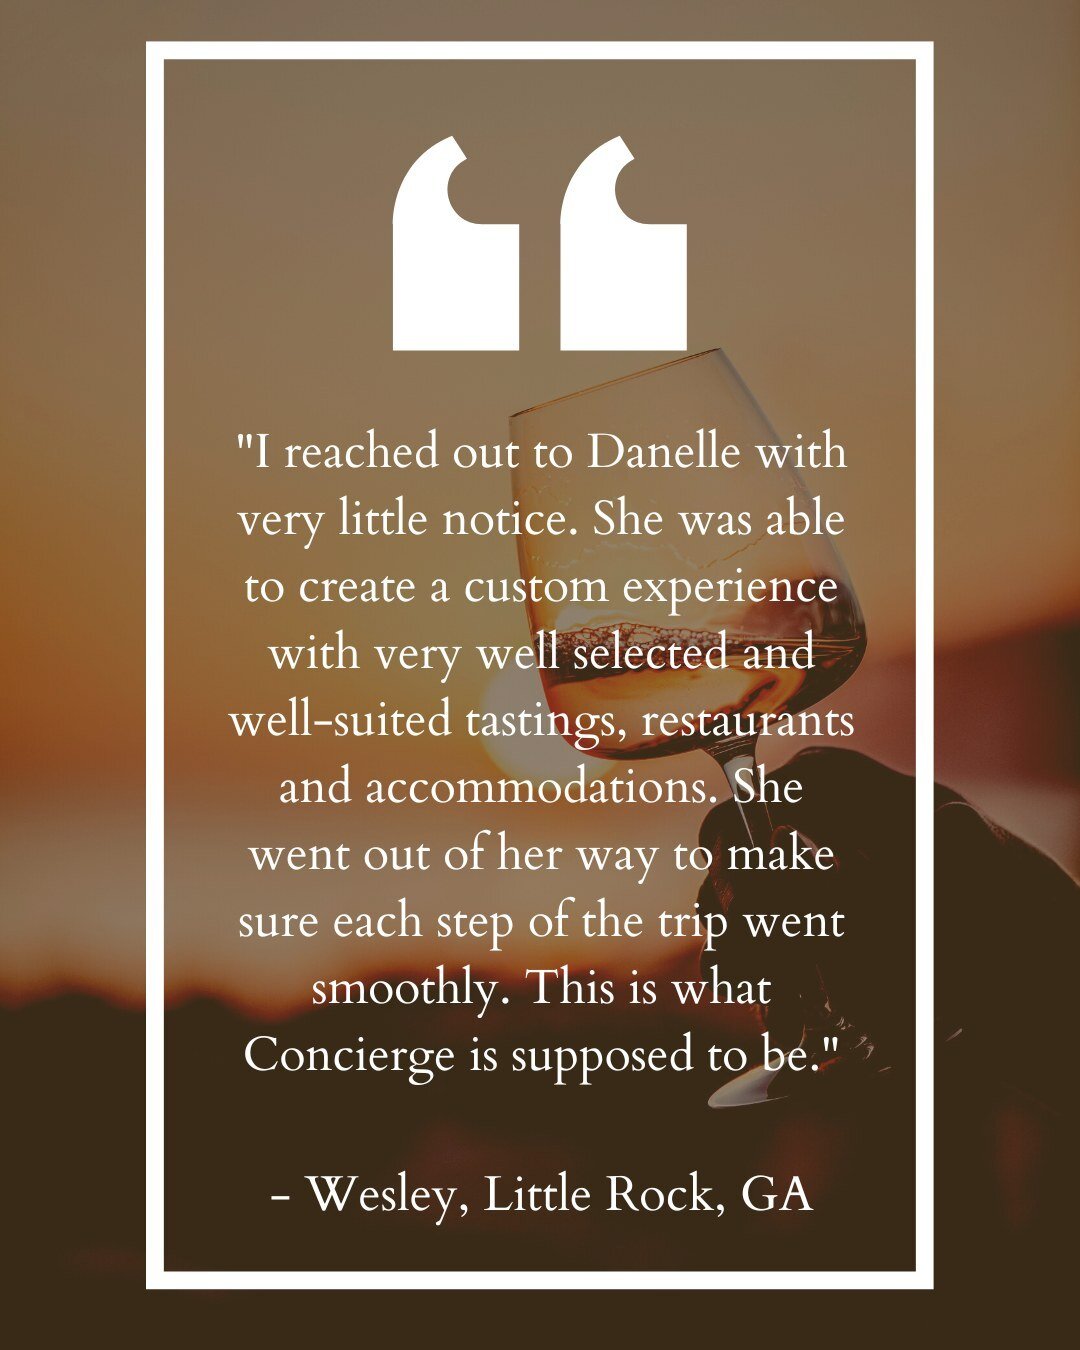 Sending a heartfelt thank you to our amazing client for their raving testimonial! We're thrilled and honored to have exceeded your expectations. Your kind words mean the world to us and serve as a reminder of why we do what we do. We appreciate your 